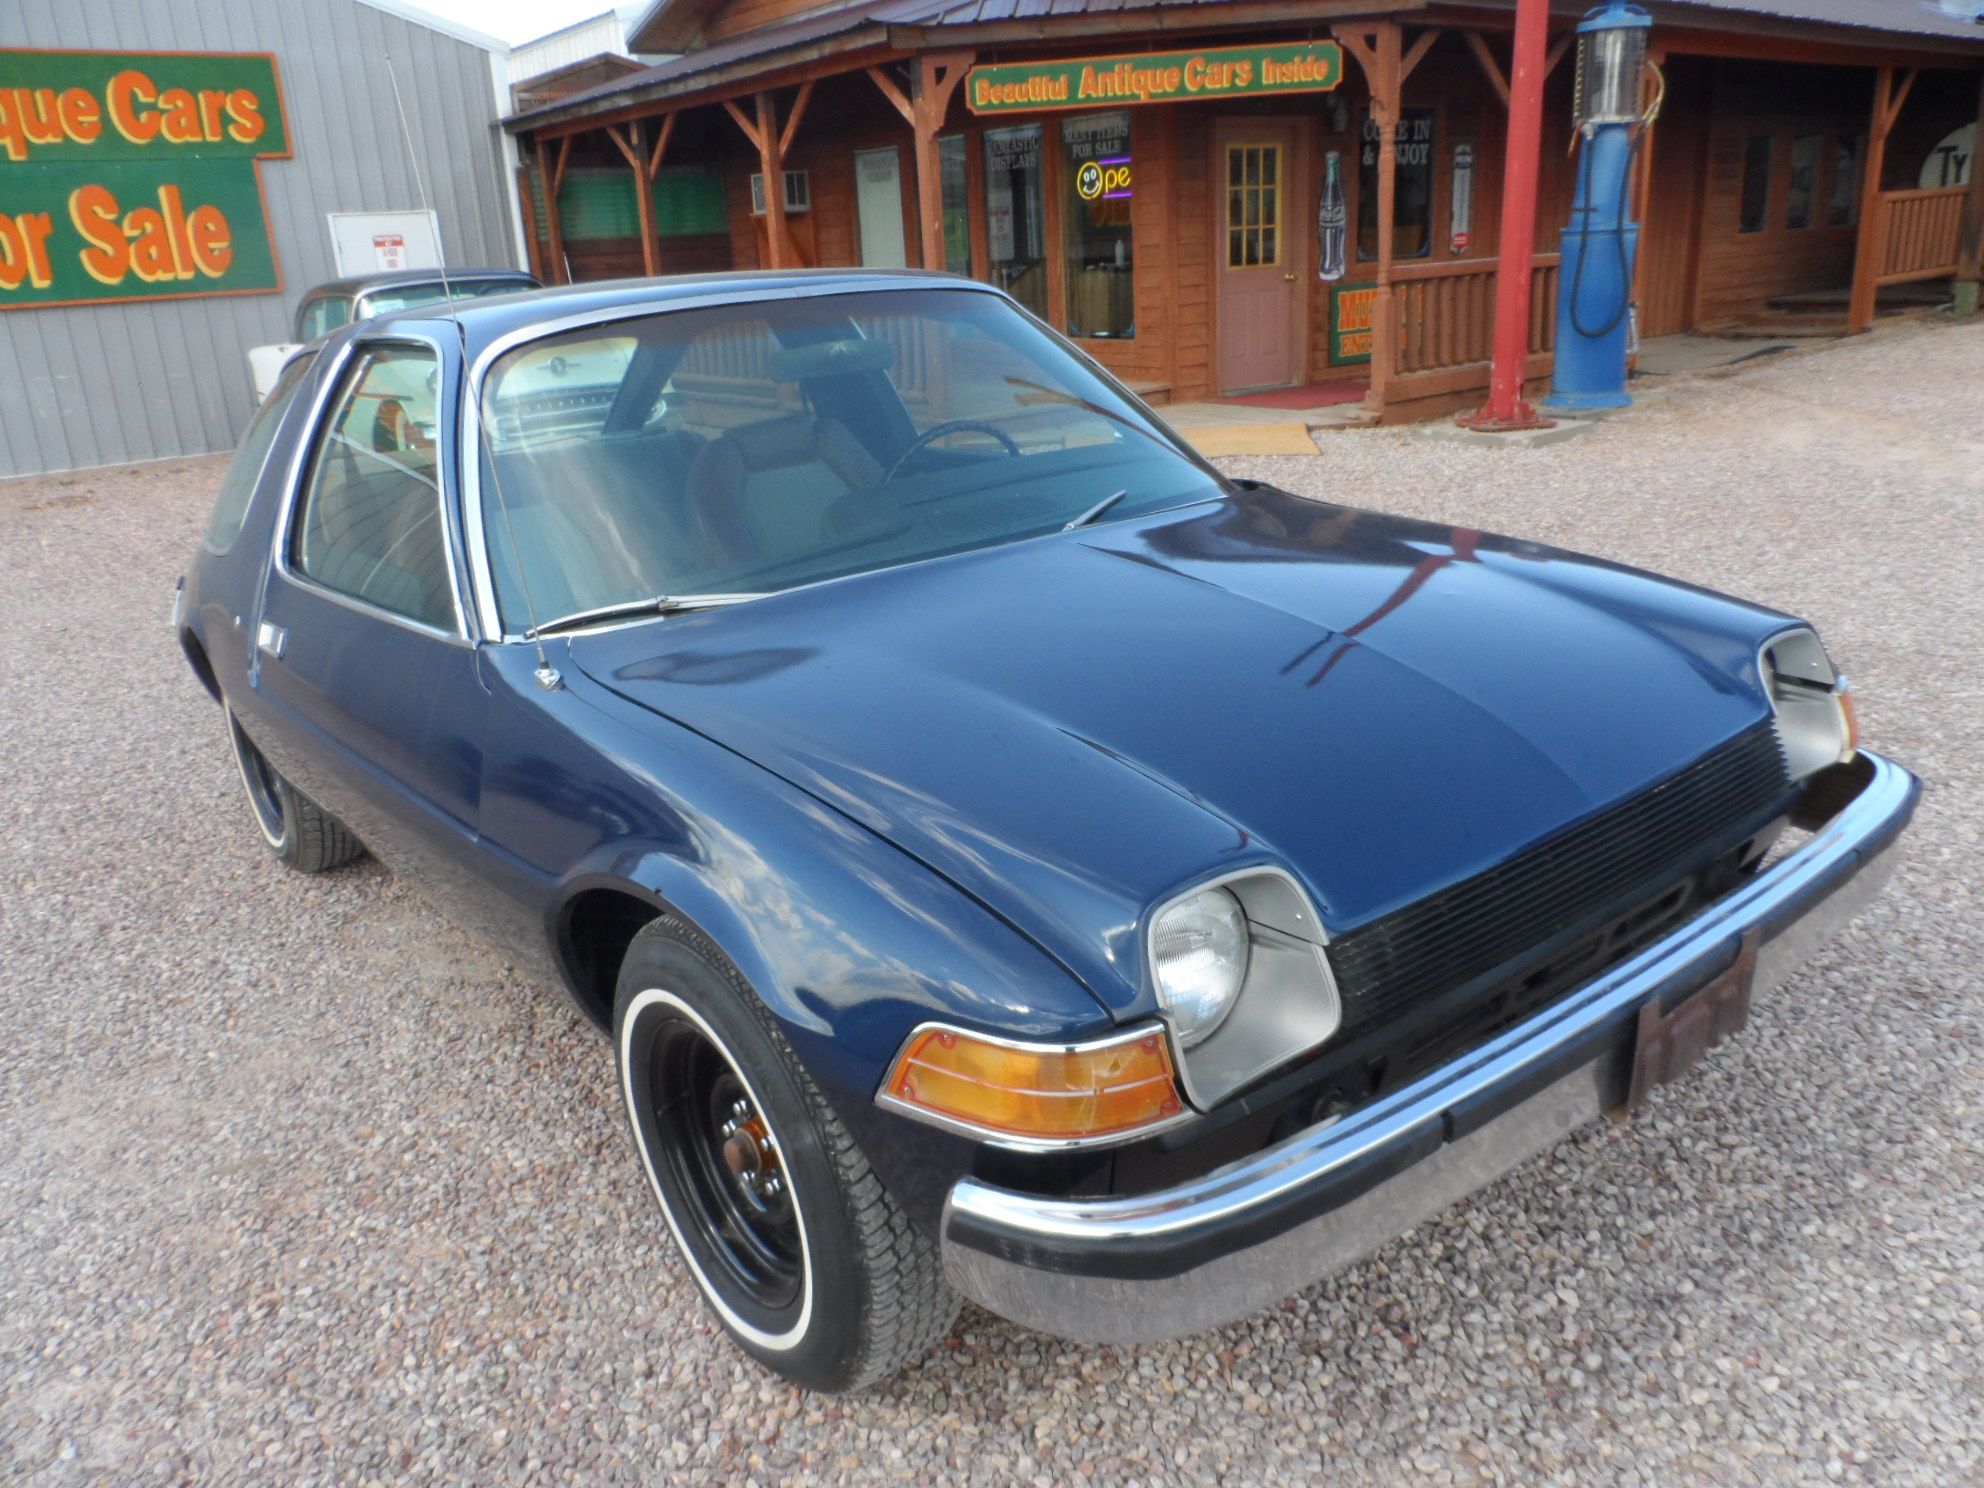  AMC Pacer With Factory Air Conditioning